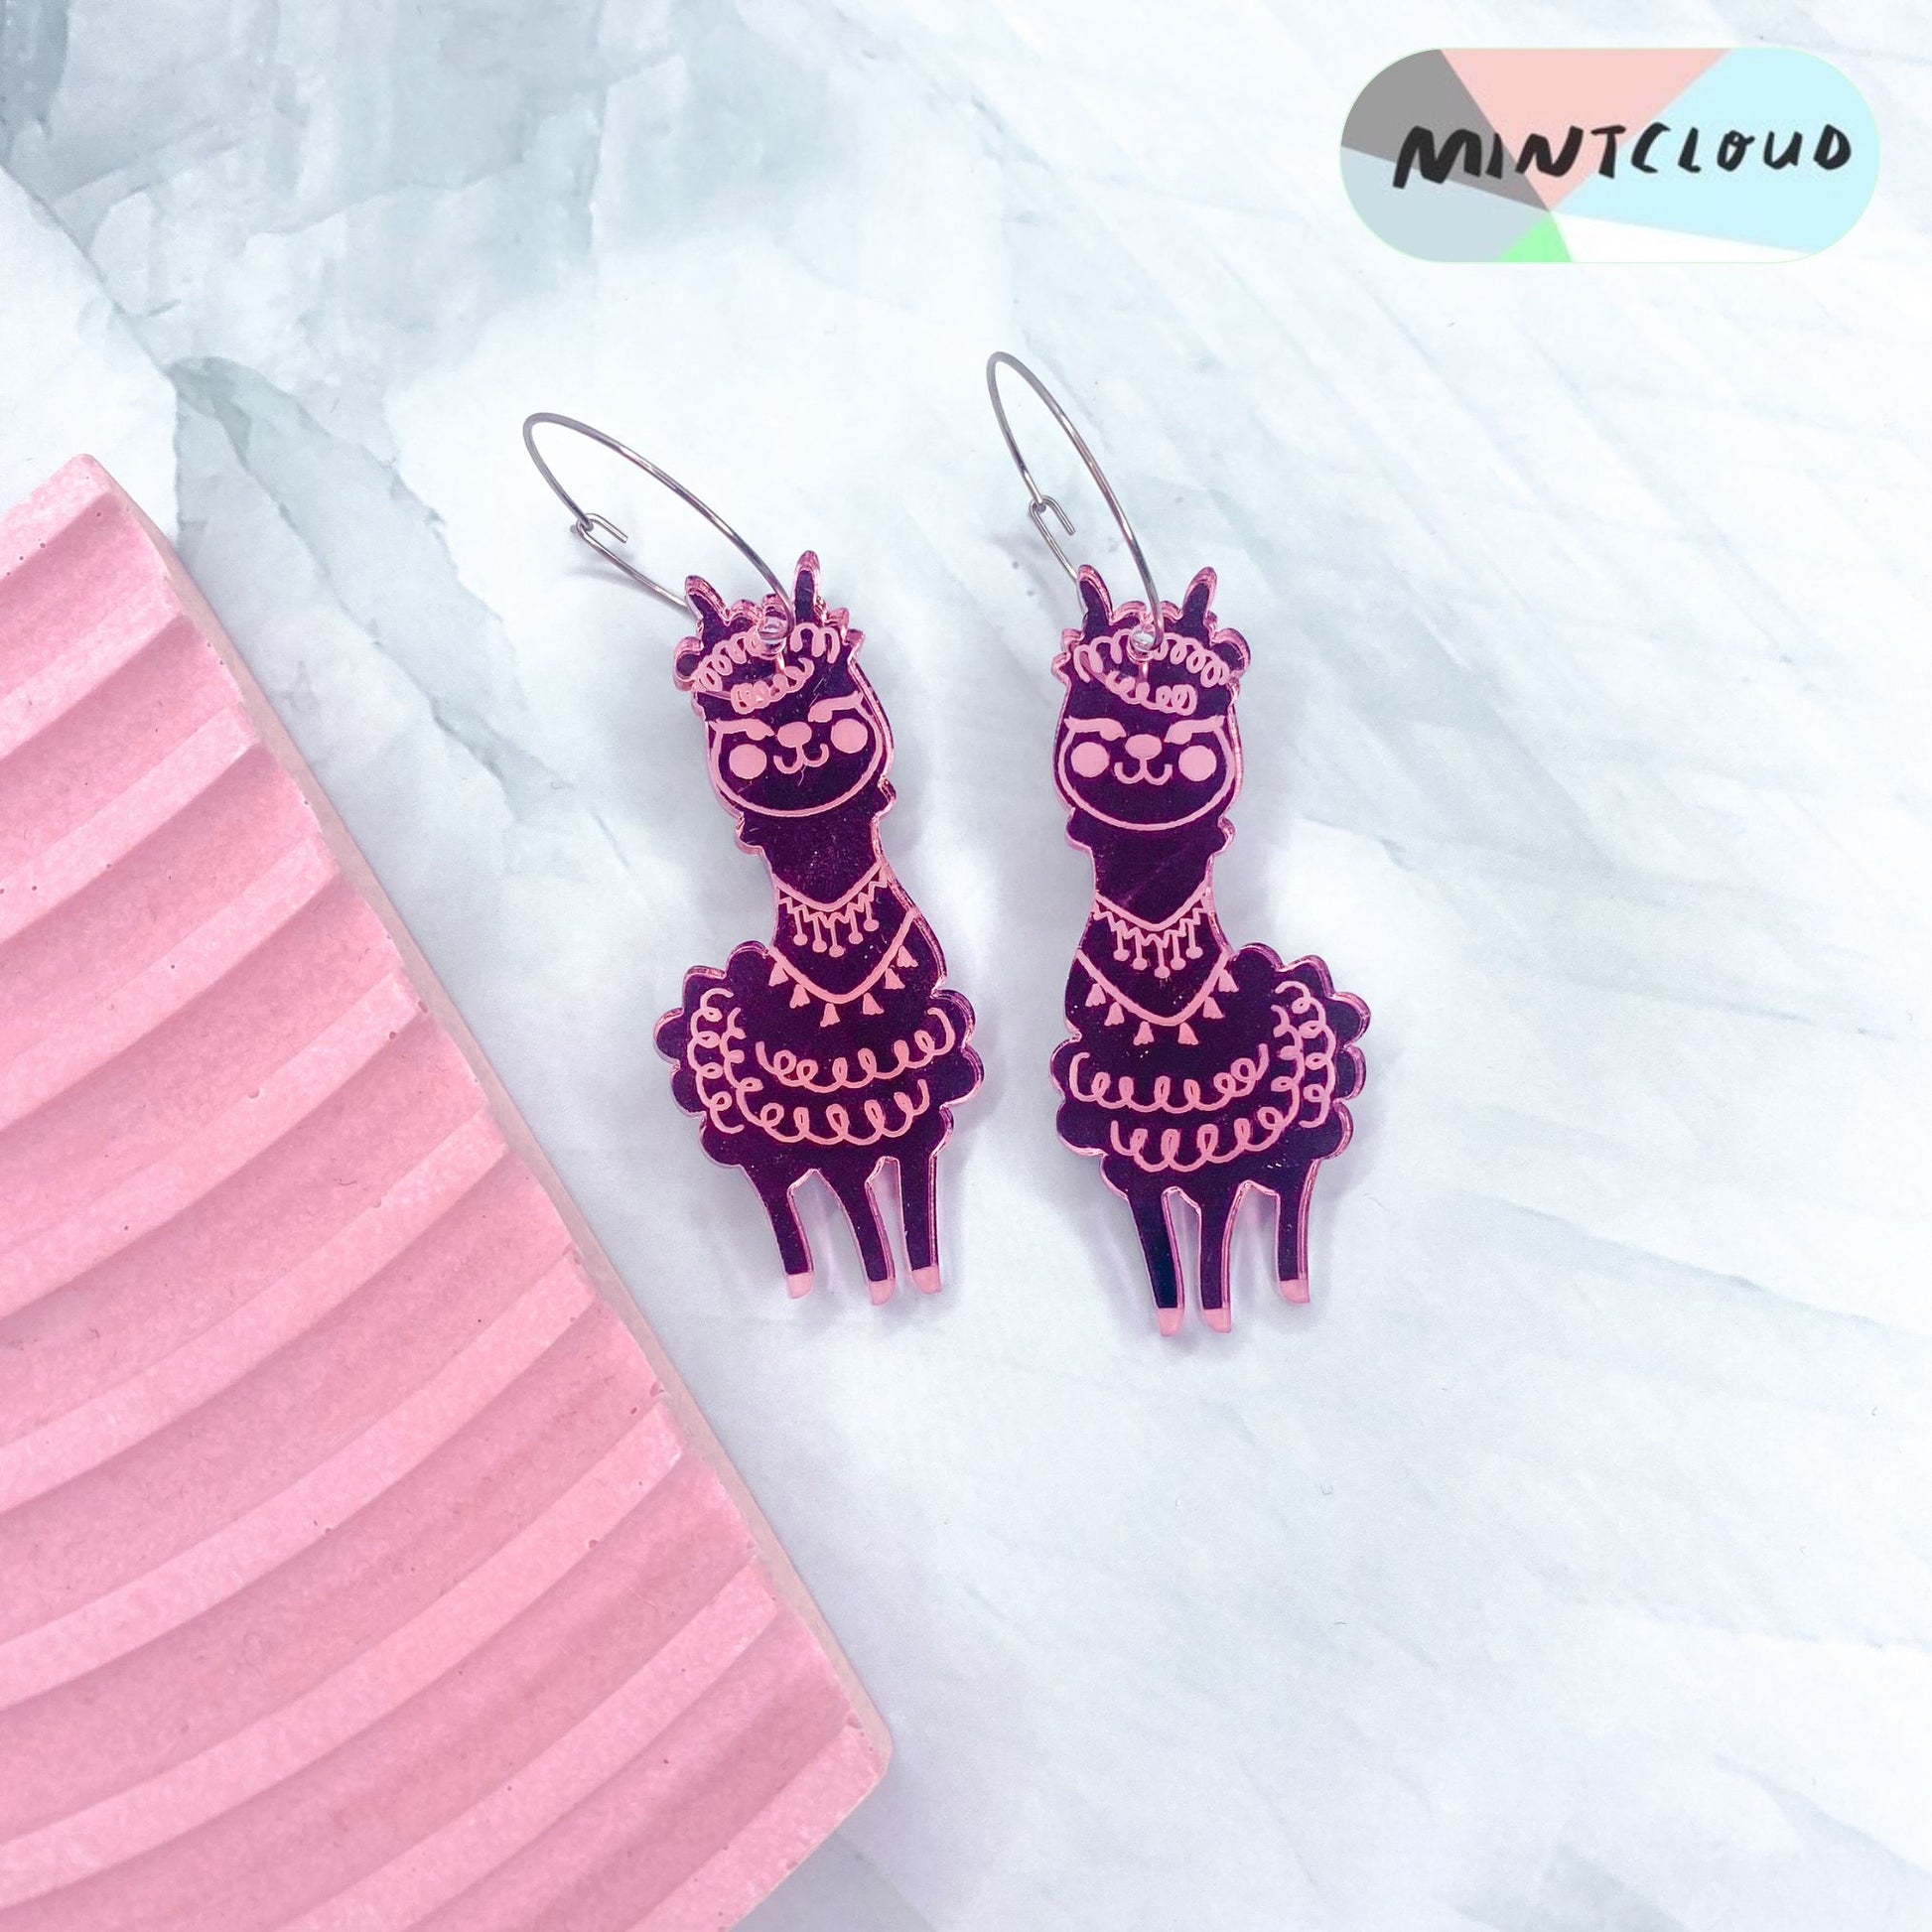 Festive Alpaca Mirror Dangles - Various Colours From Mintcloud Studio, an online jewellery store based in Adelaide South Australia